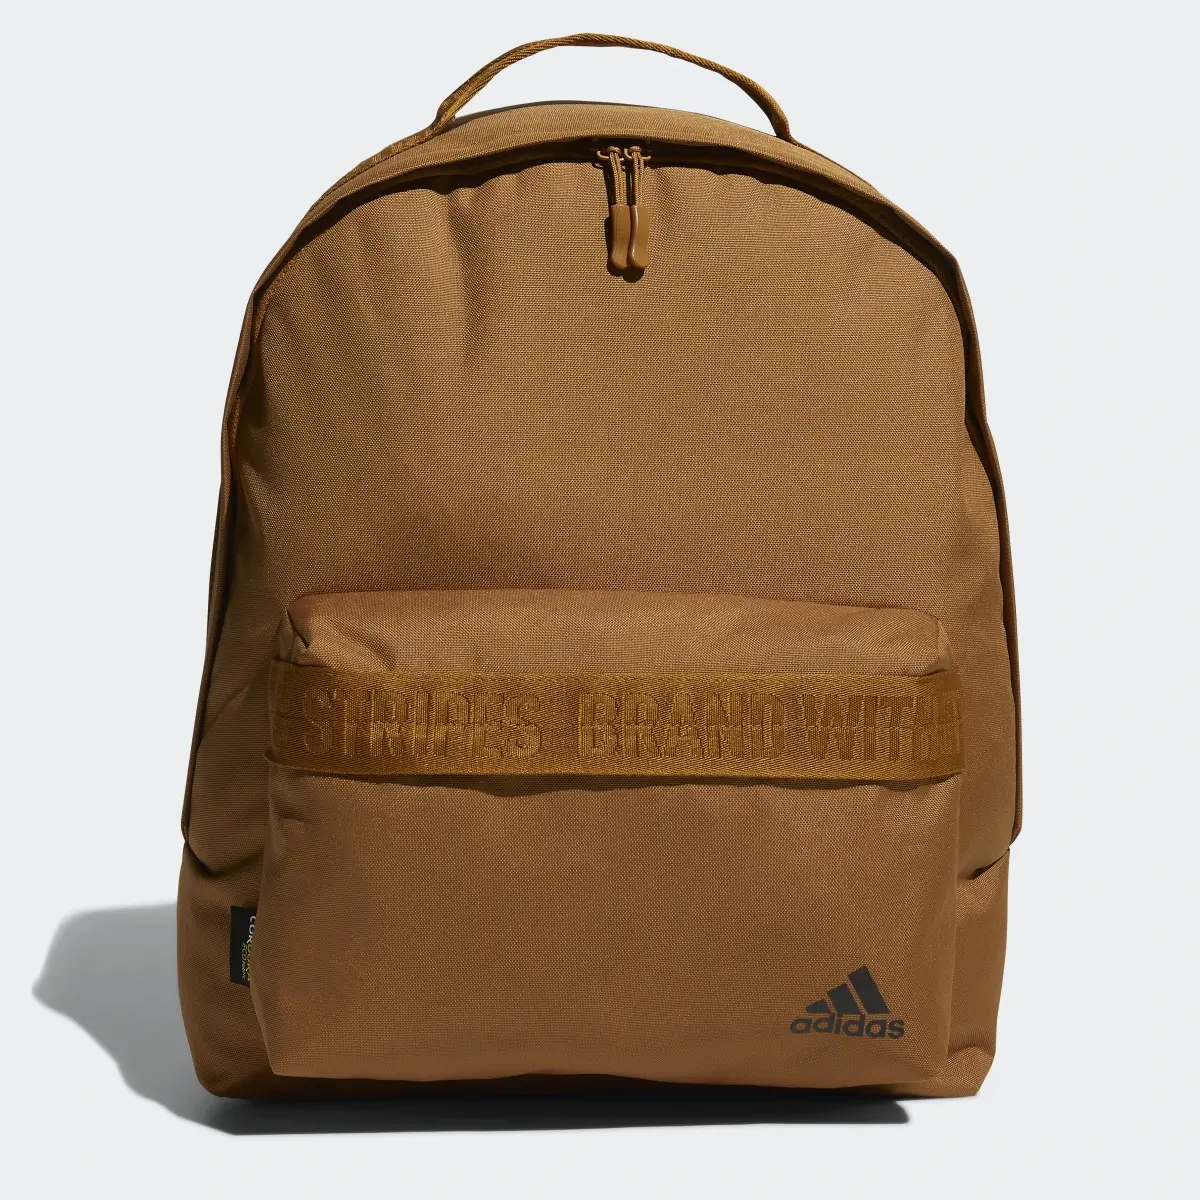 Adidas Must Haves Backpack. 2